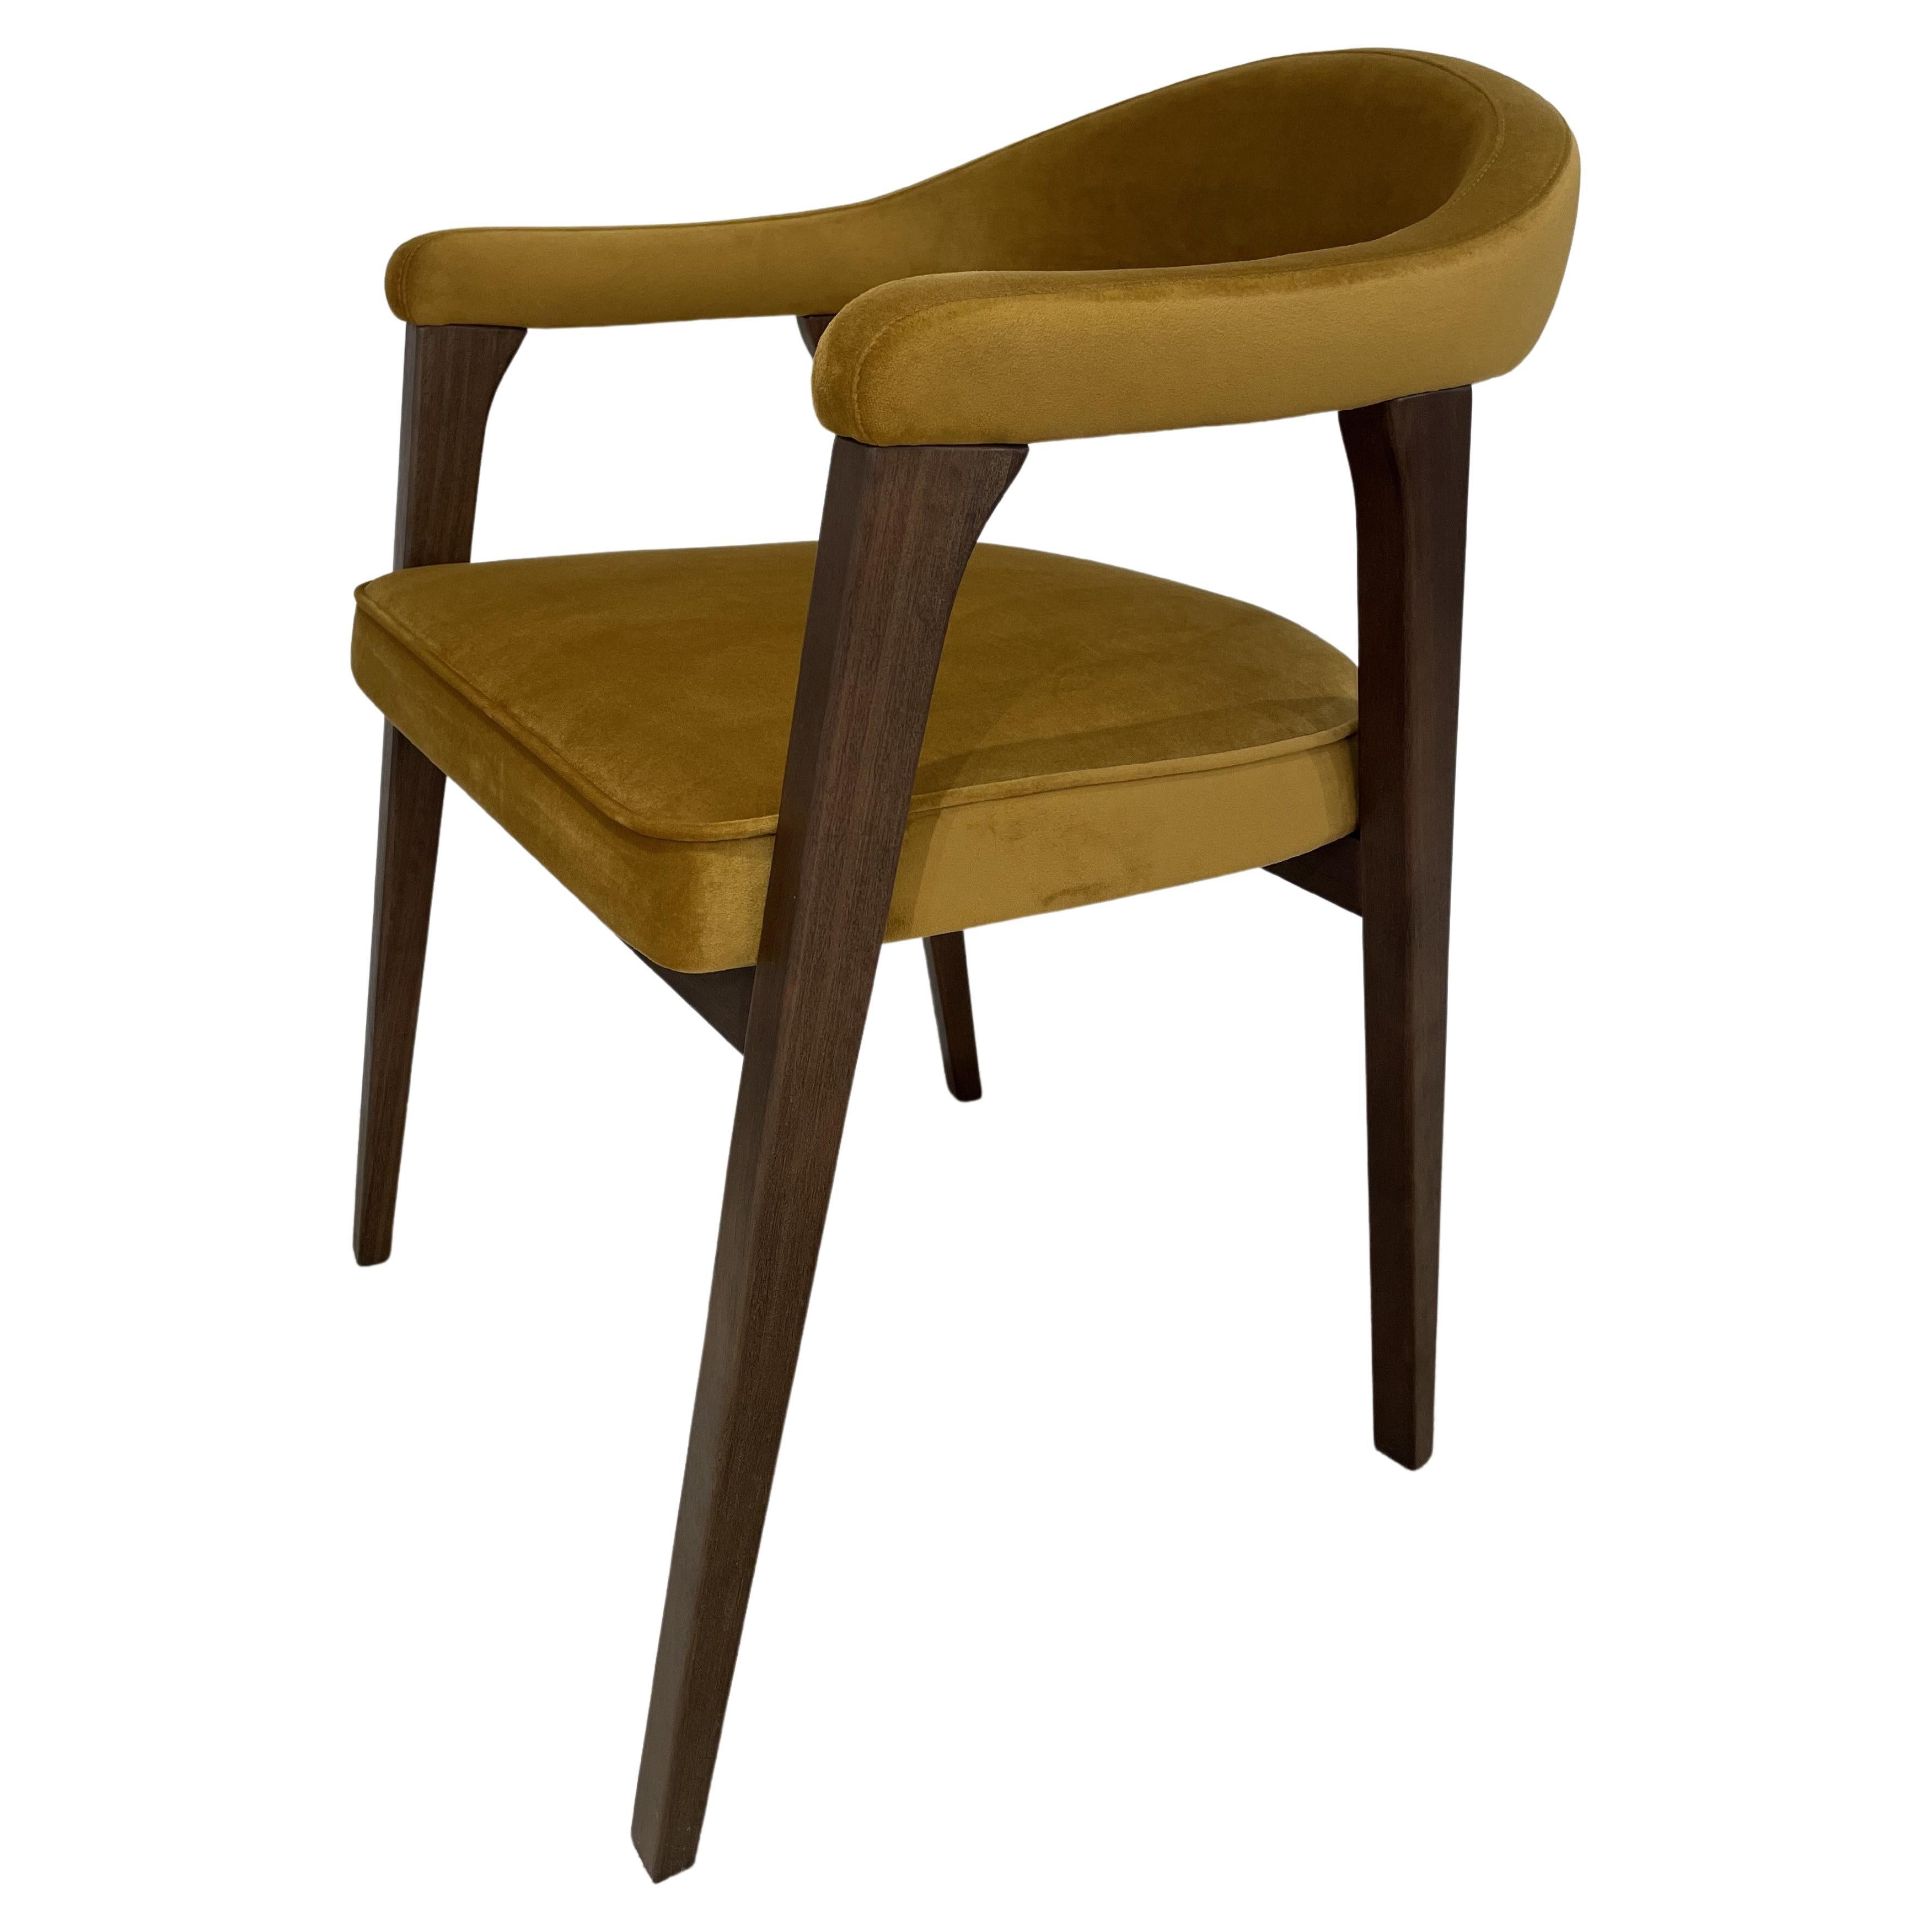 1960s Danish Design and Scandinavian Style Wooden and Velvet Fabric Chair For Sale